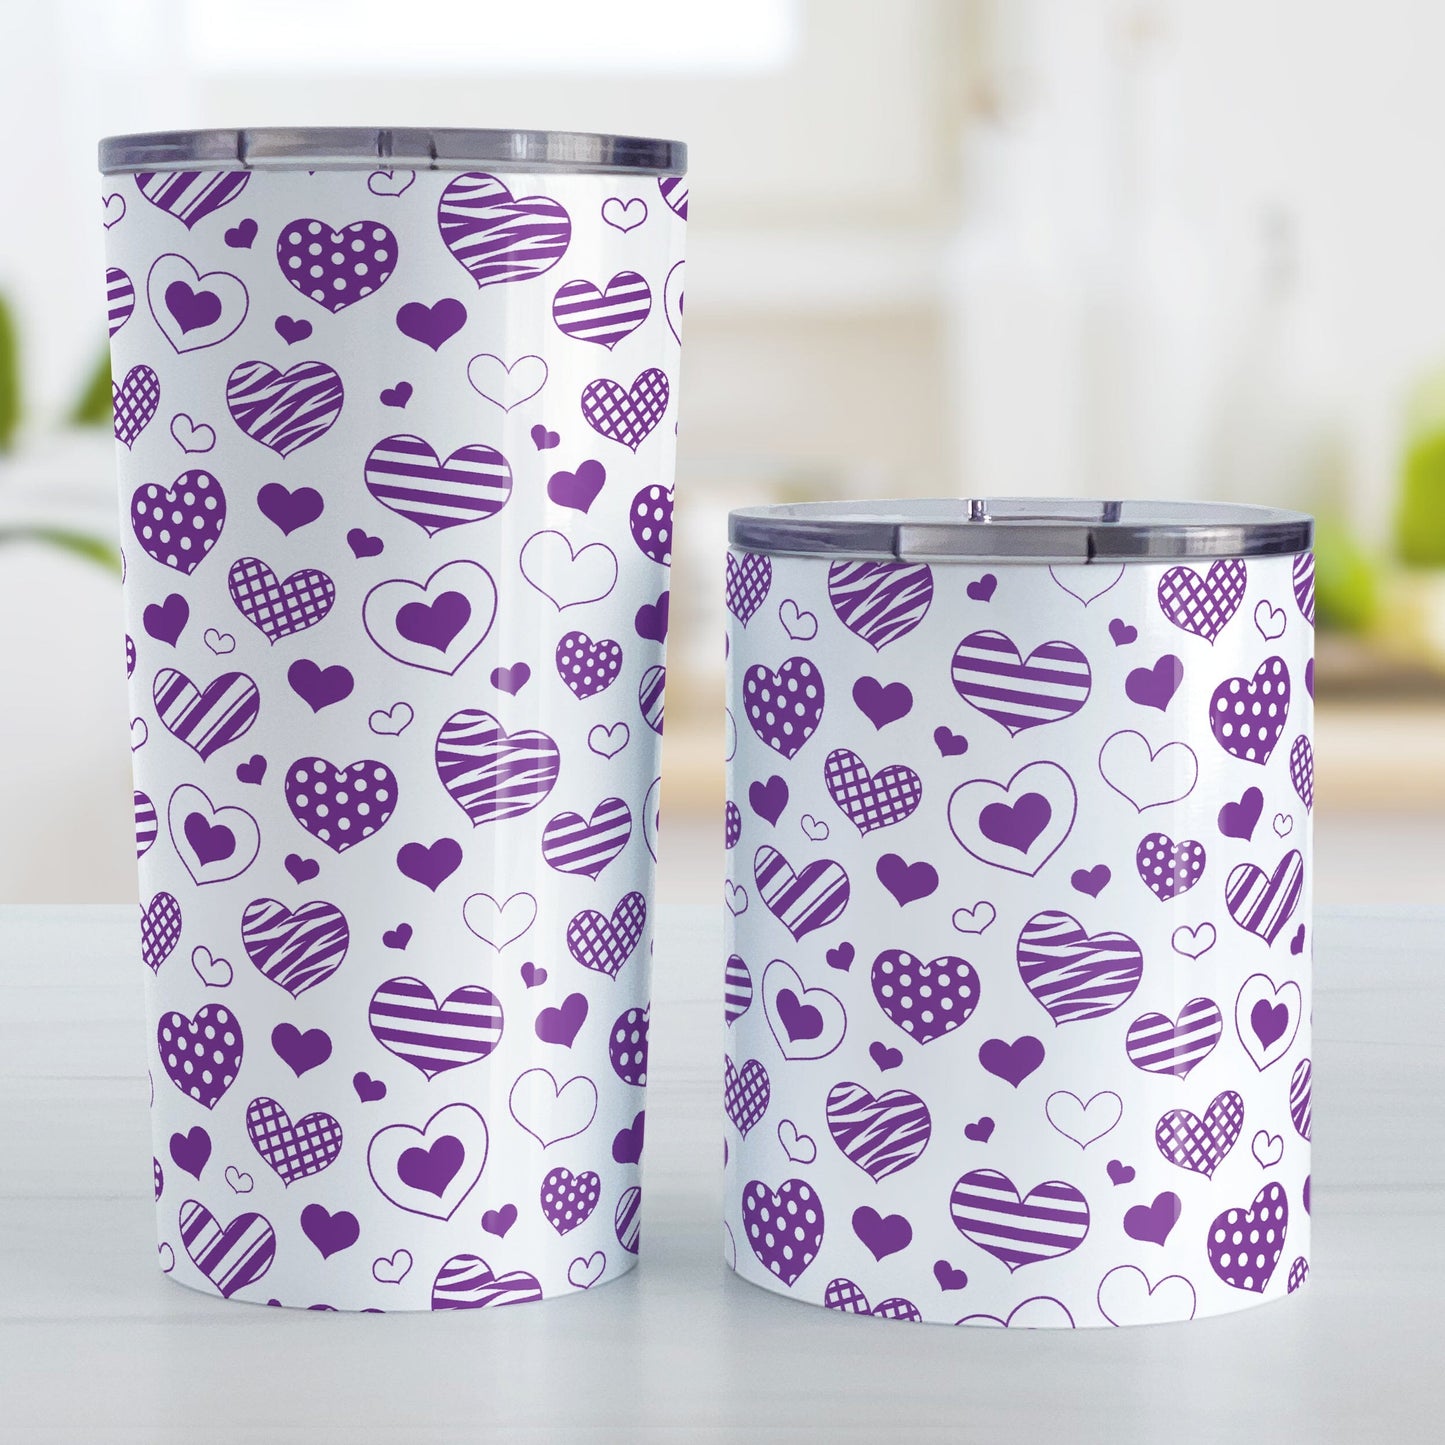 Purple Heart Doodles Tumbler Cup (20oz or 10oz) at Amy's Coffee Mugs. Stainless steel tumbler cups designed with a print of hand-drawn purple heart doodles in a pattern that wraps around the cups. This cute heart pattern is perfect for Valentine's Day or for anyone who loves hearts and young-at-heart drawings. Photo shows both sized cups on a table next to each other.